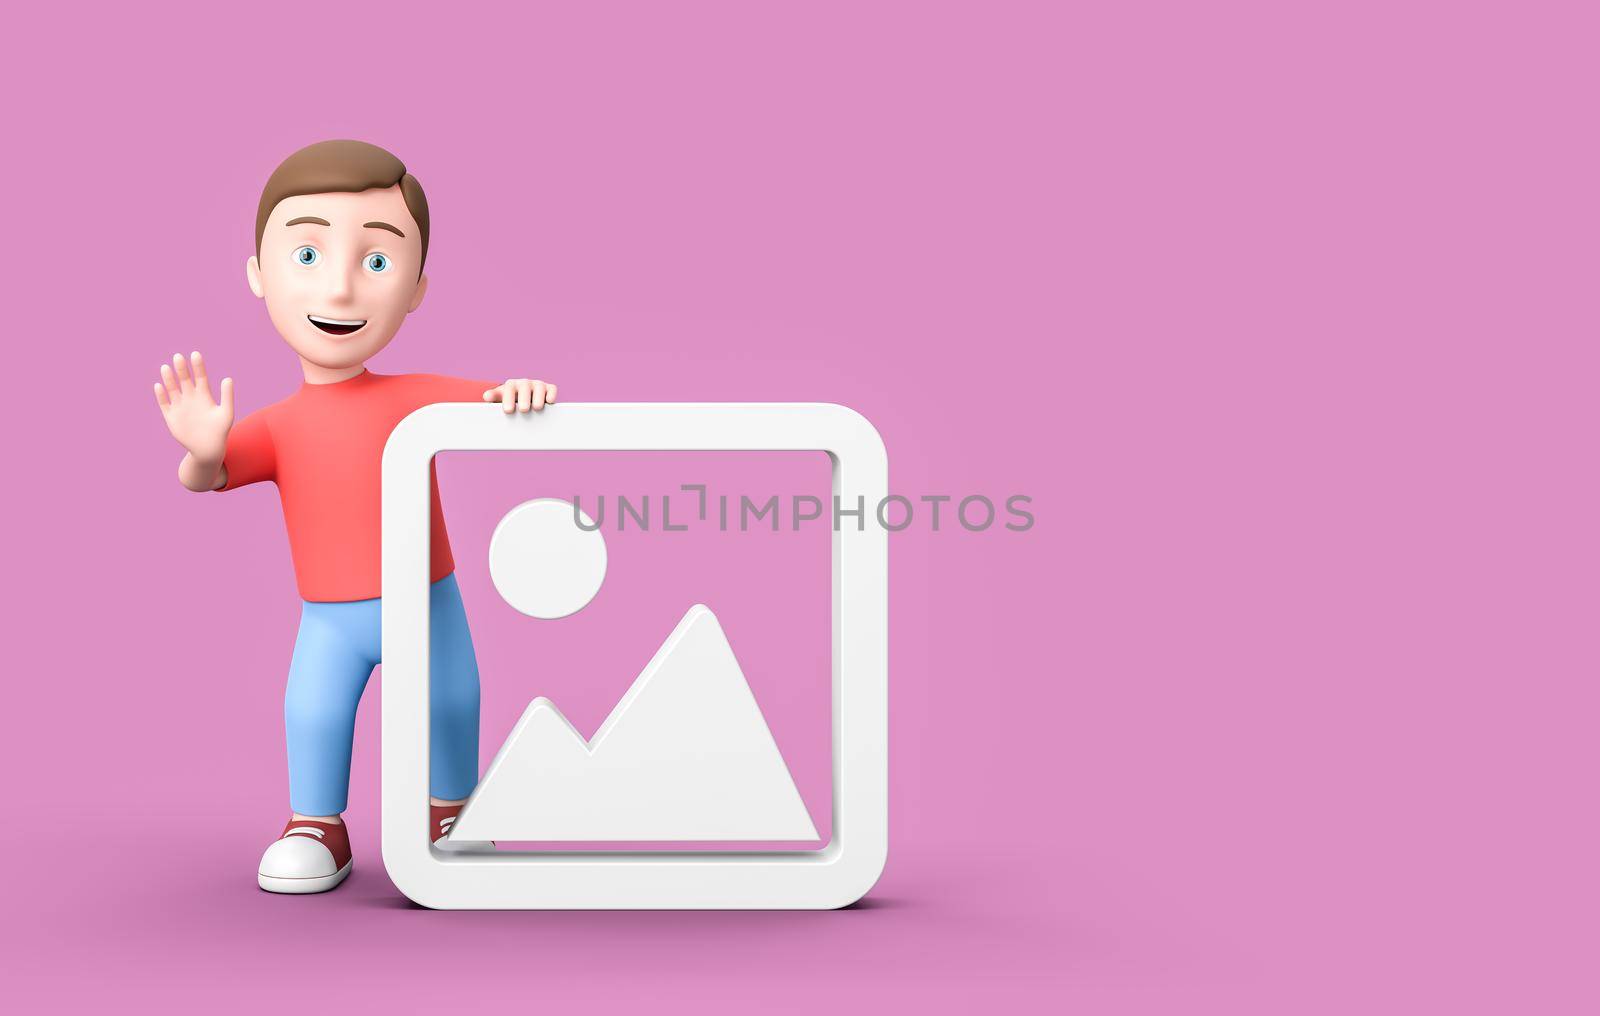 3D Cartoon Character with Picture Symbol on Purple Background with Copy Space by make